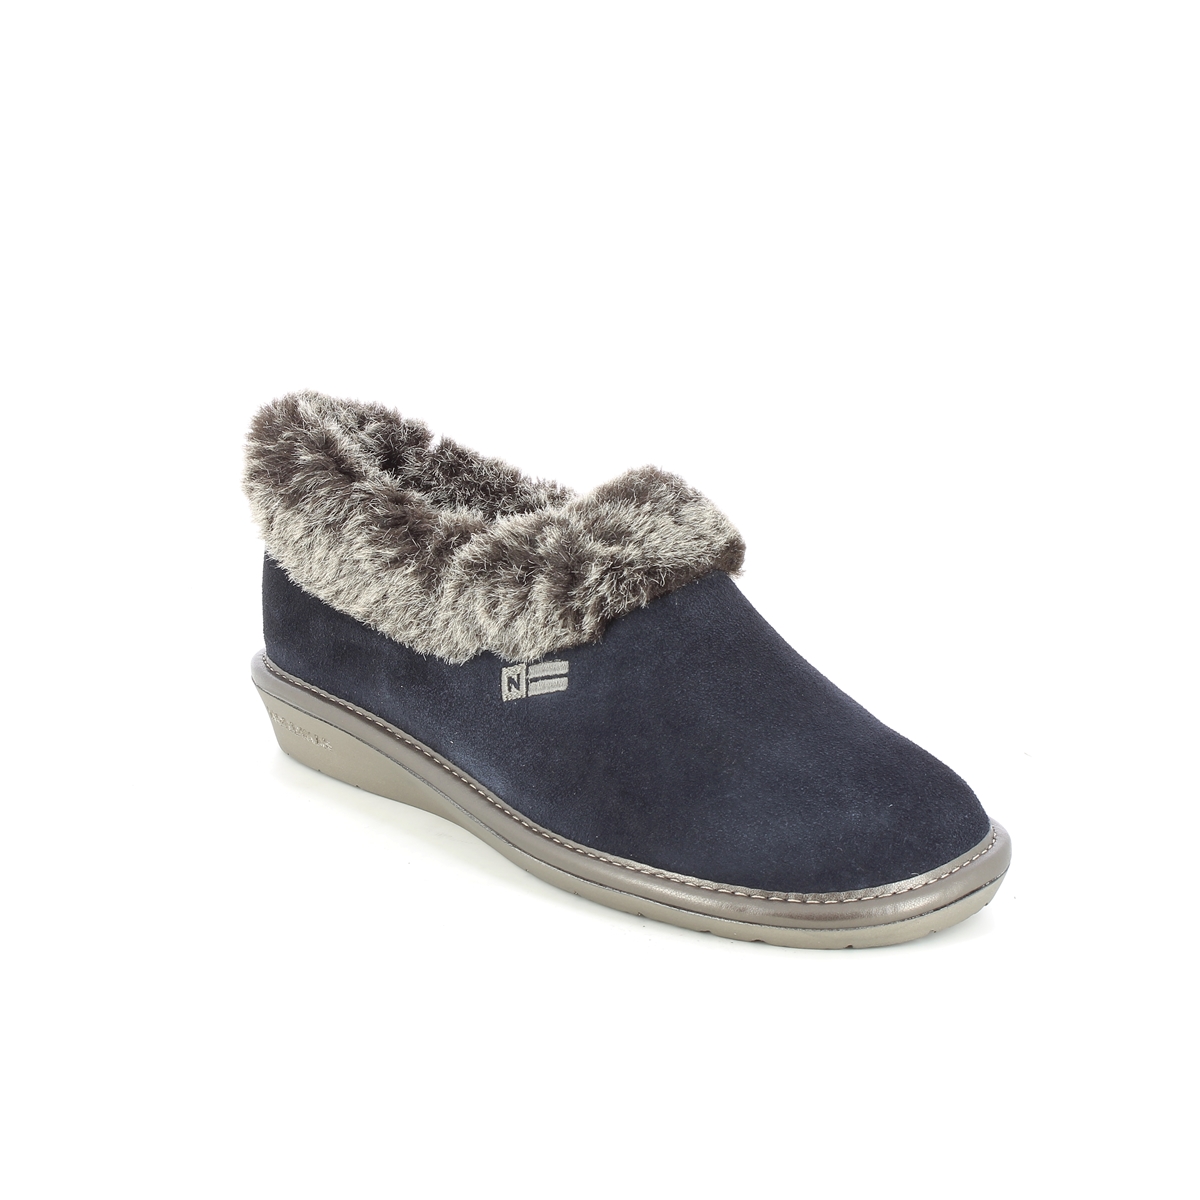 Nordikas Toasty Fur Navy Suede Womens Slippers 1358-4O In Size 42 In Plain Navy Suede